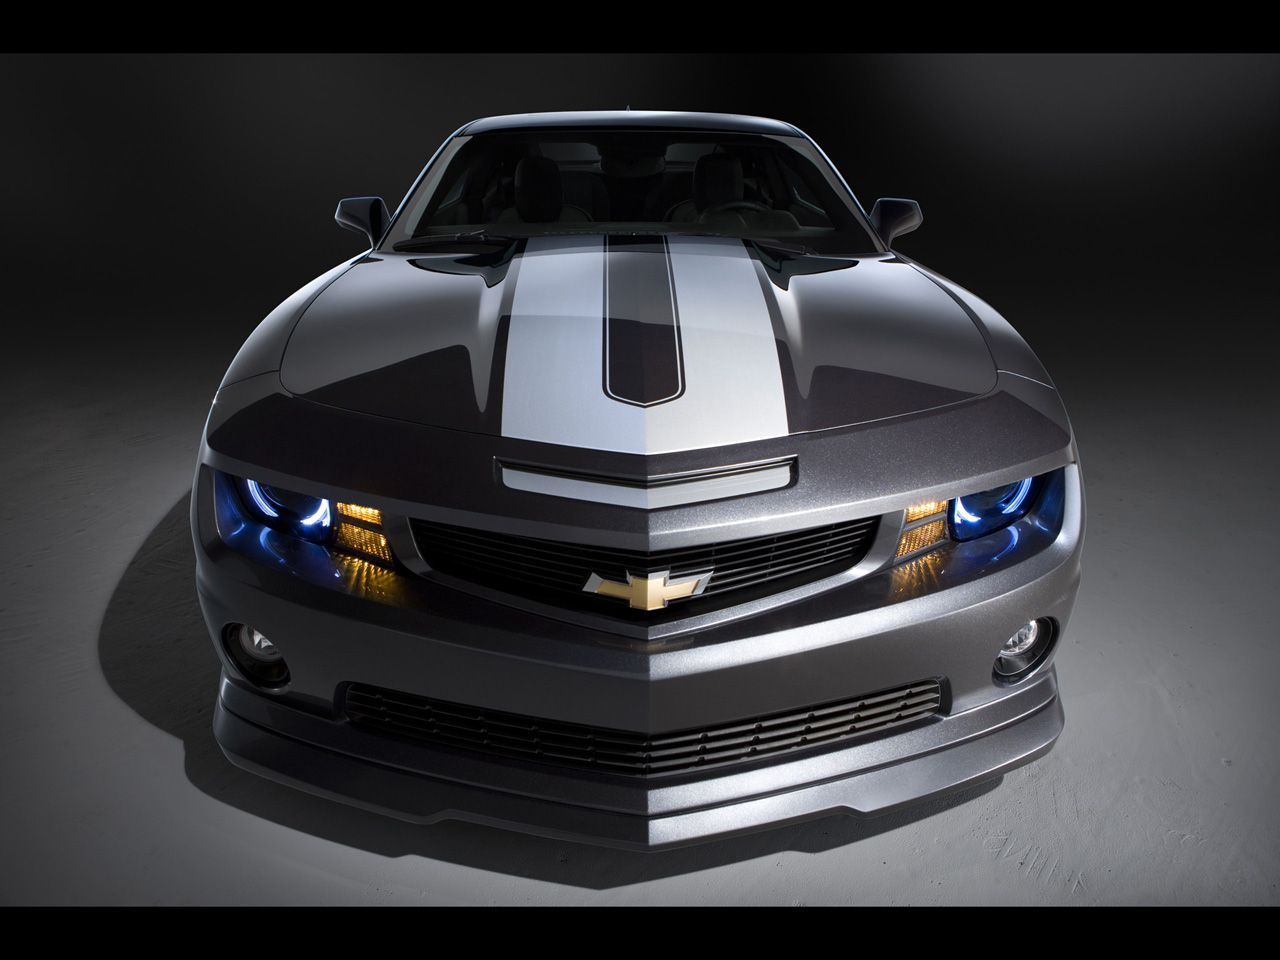 Awesome Chevrolet Camaro Wallpaper | Full HD Pictures